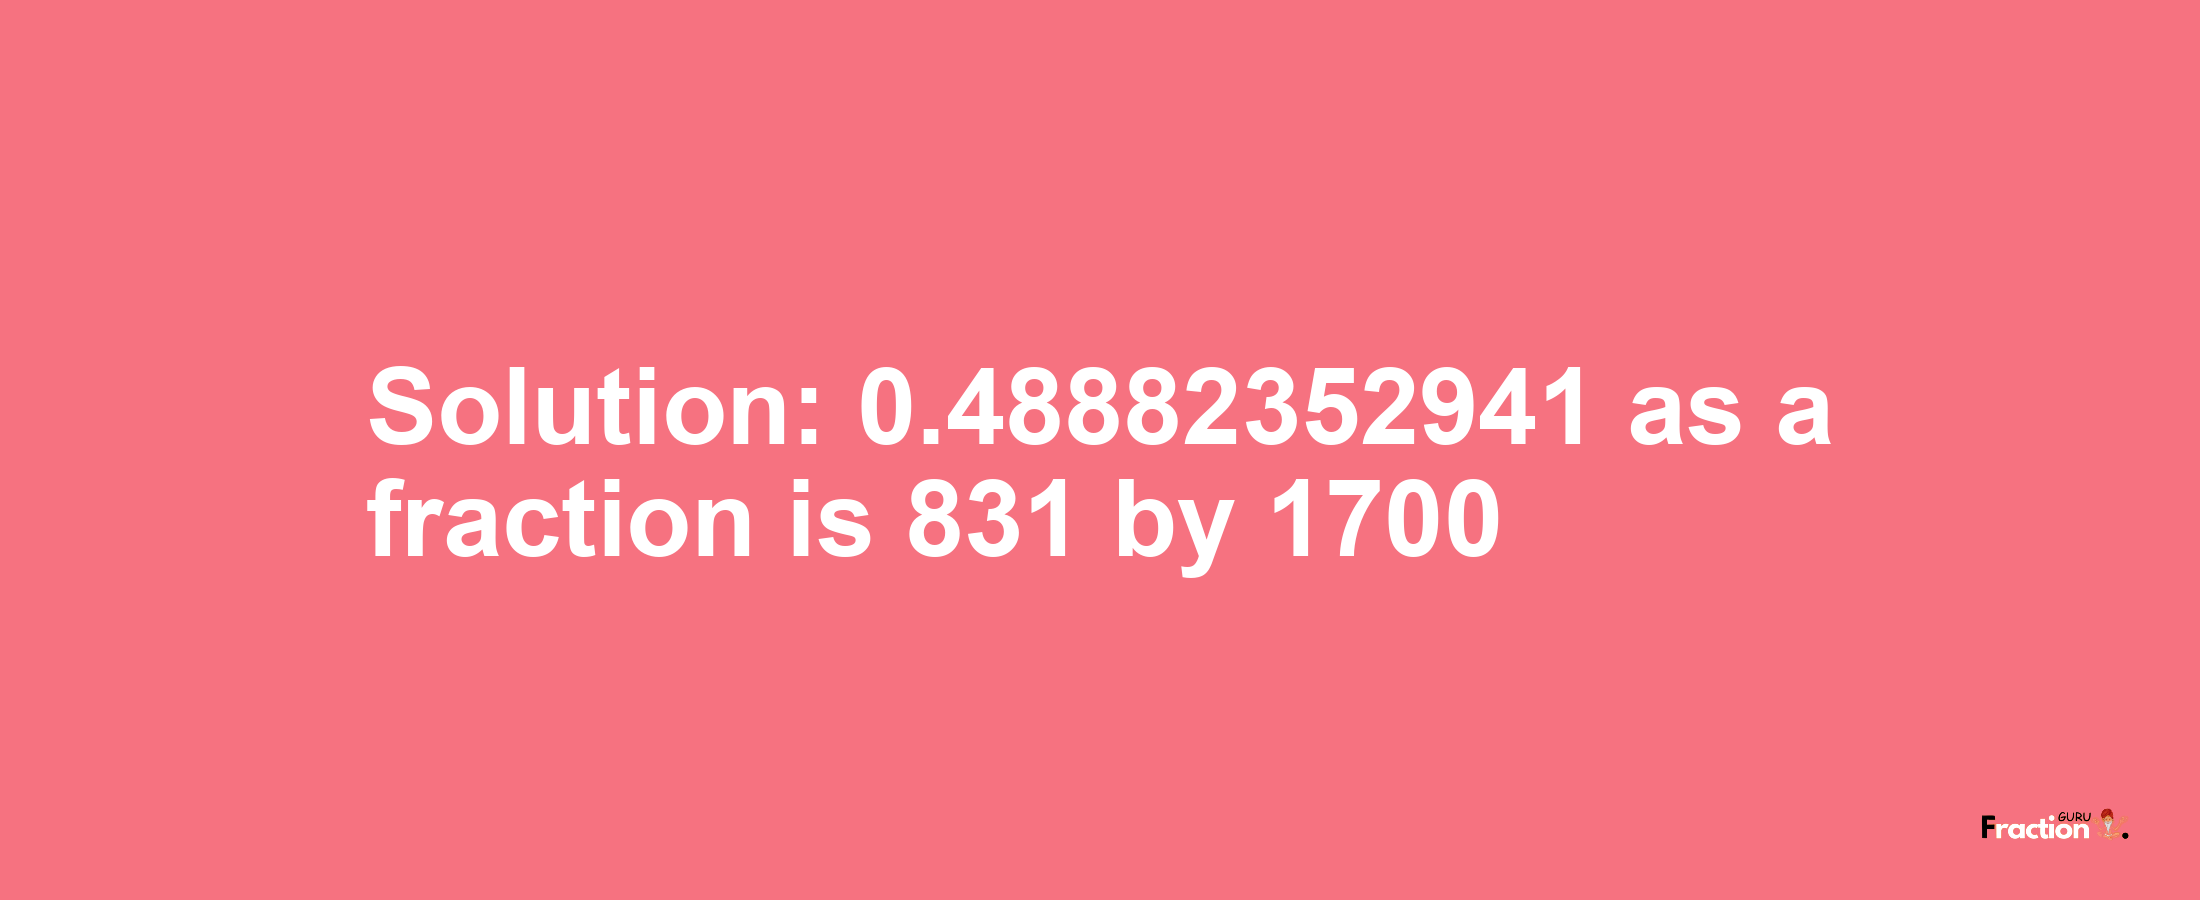 Solution:0.48882352941 as a fraction is 831/1700